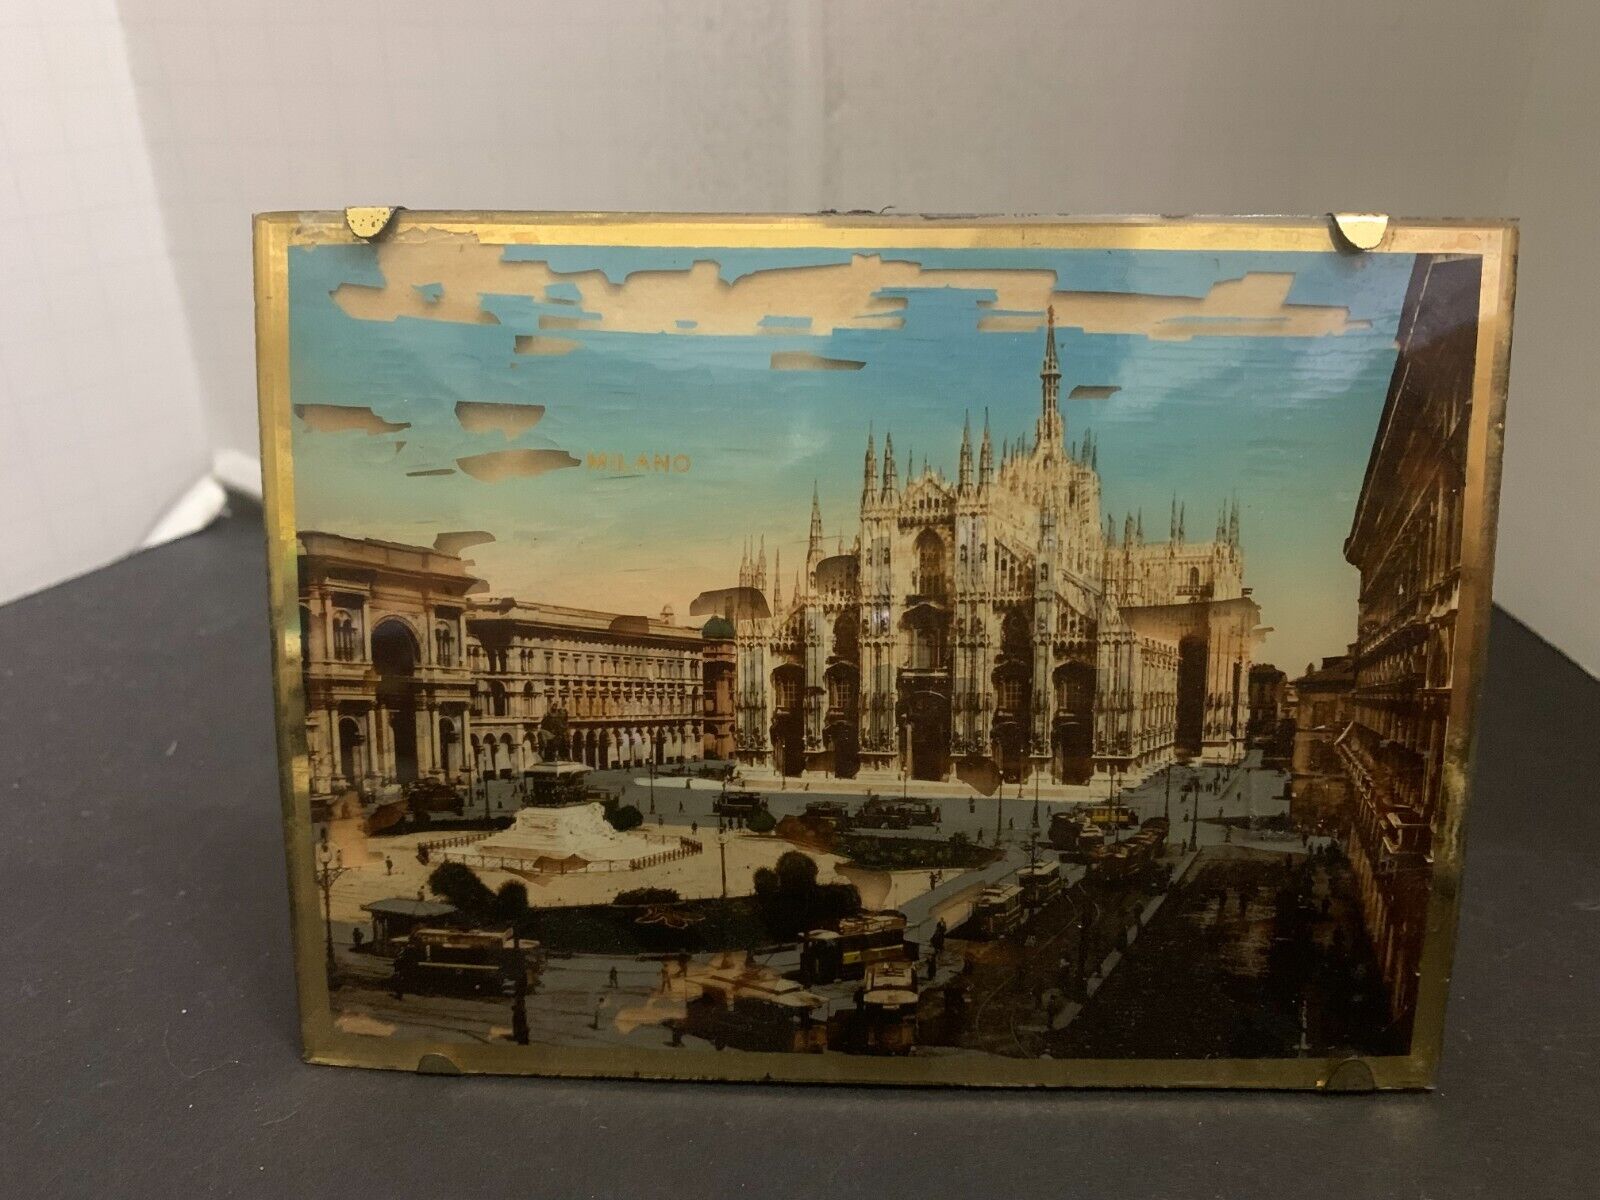 Antique Duomo di Milano Cathedral Italy Souvenir Reverse Painting on Glass